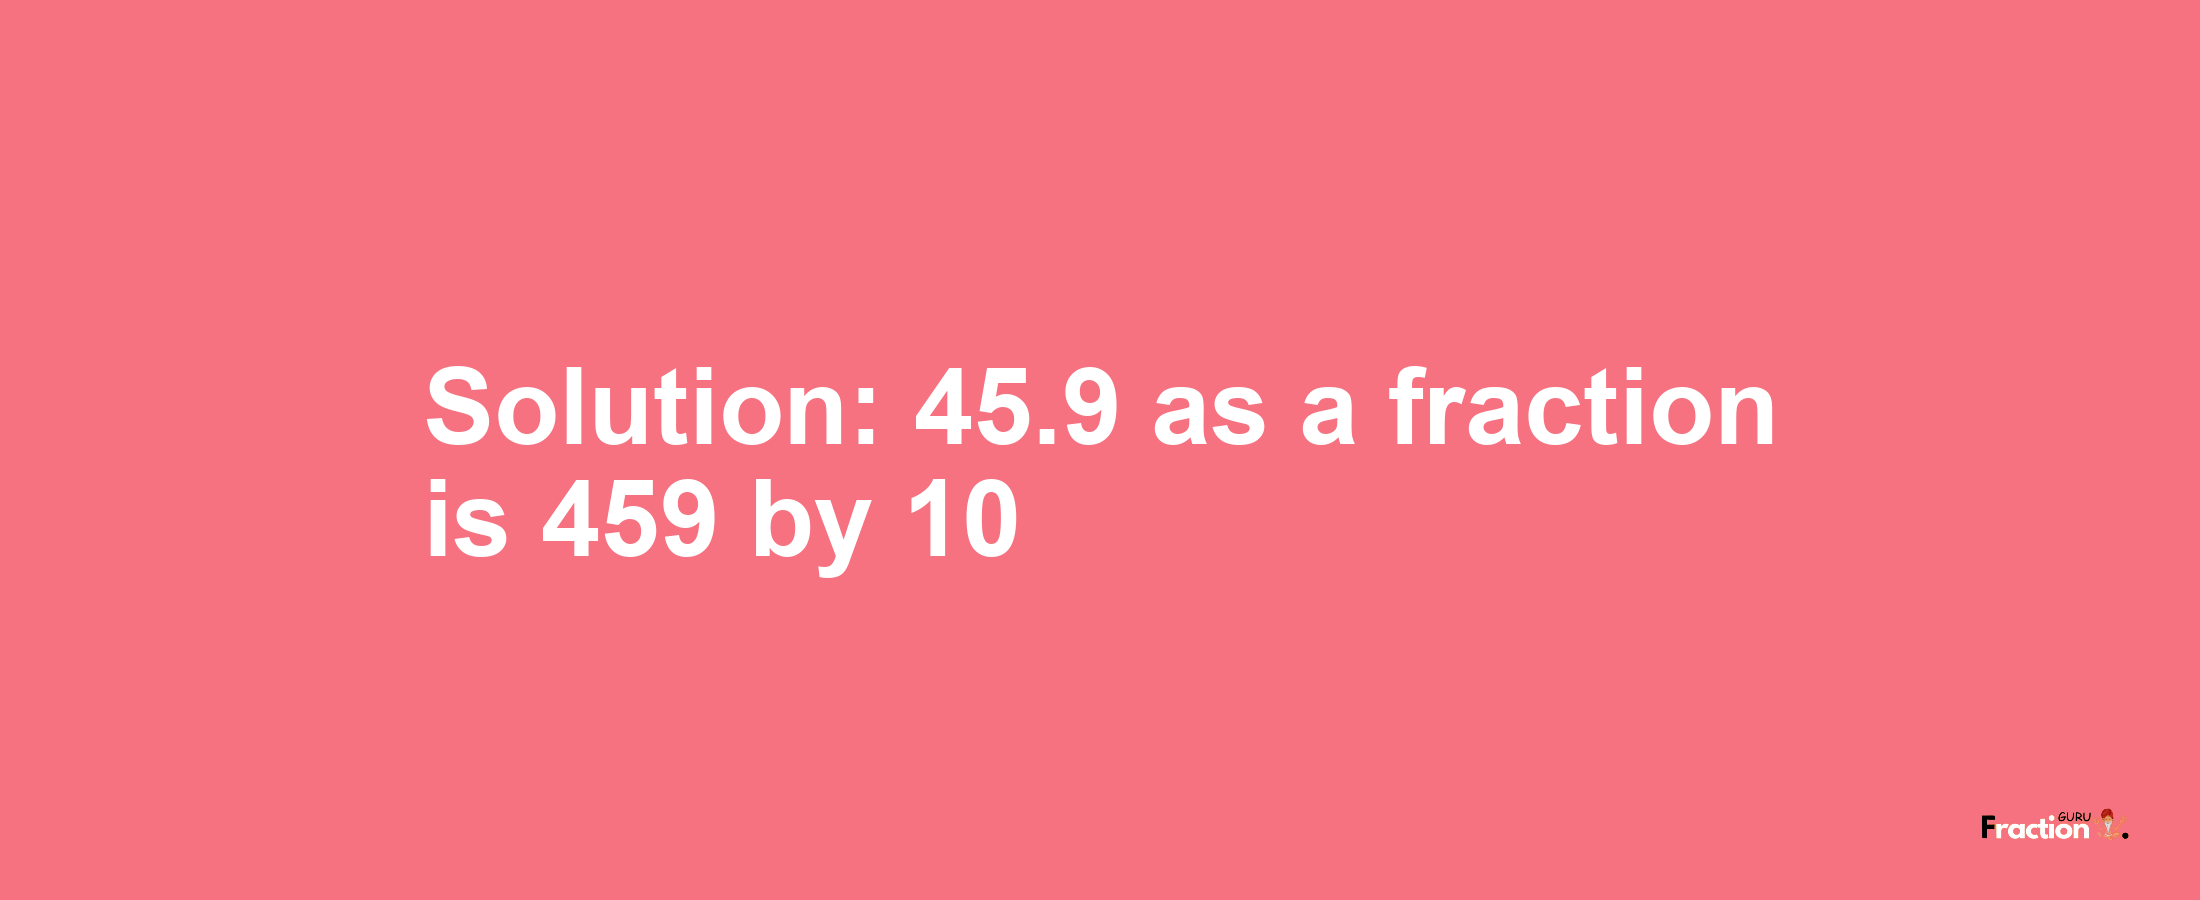 Solution:45.9 as a fraction is 459/10